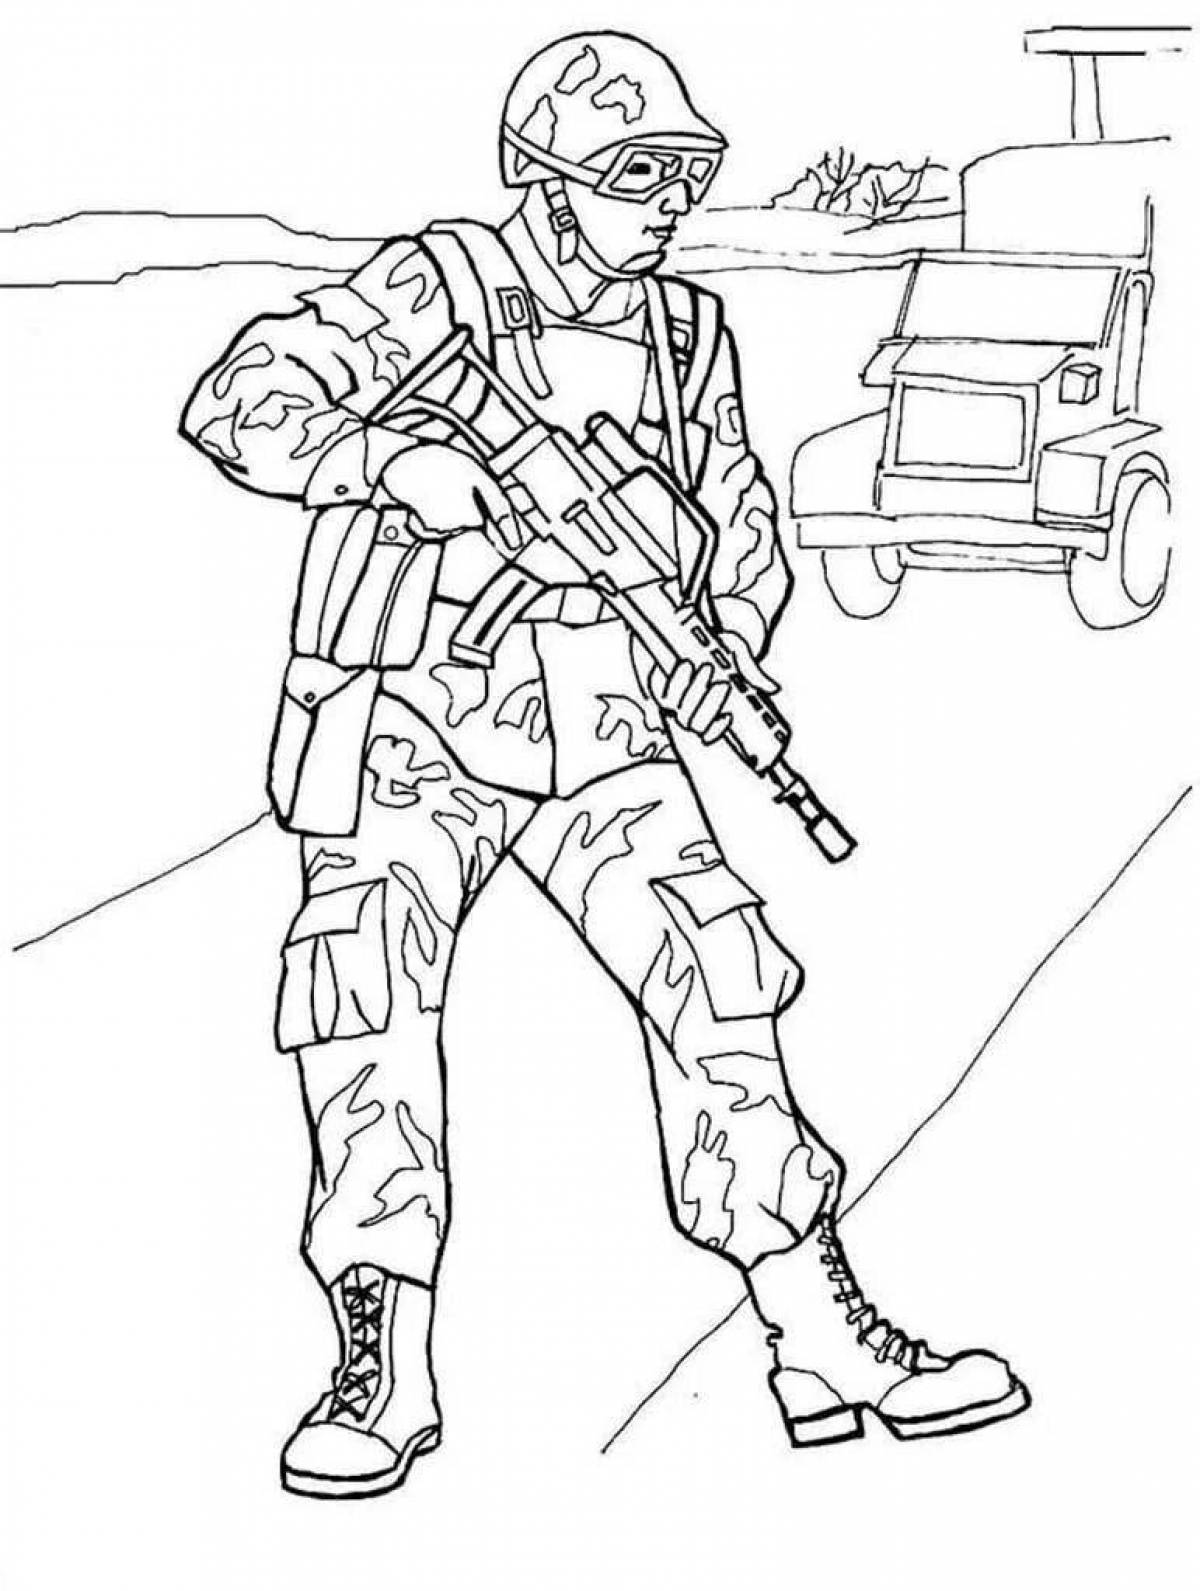 Dazzling Russian special forces coloring page